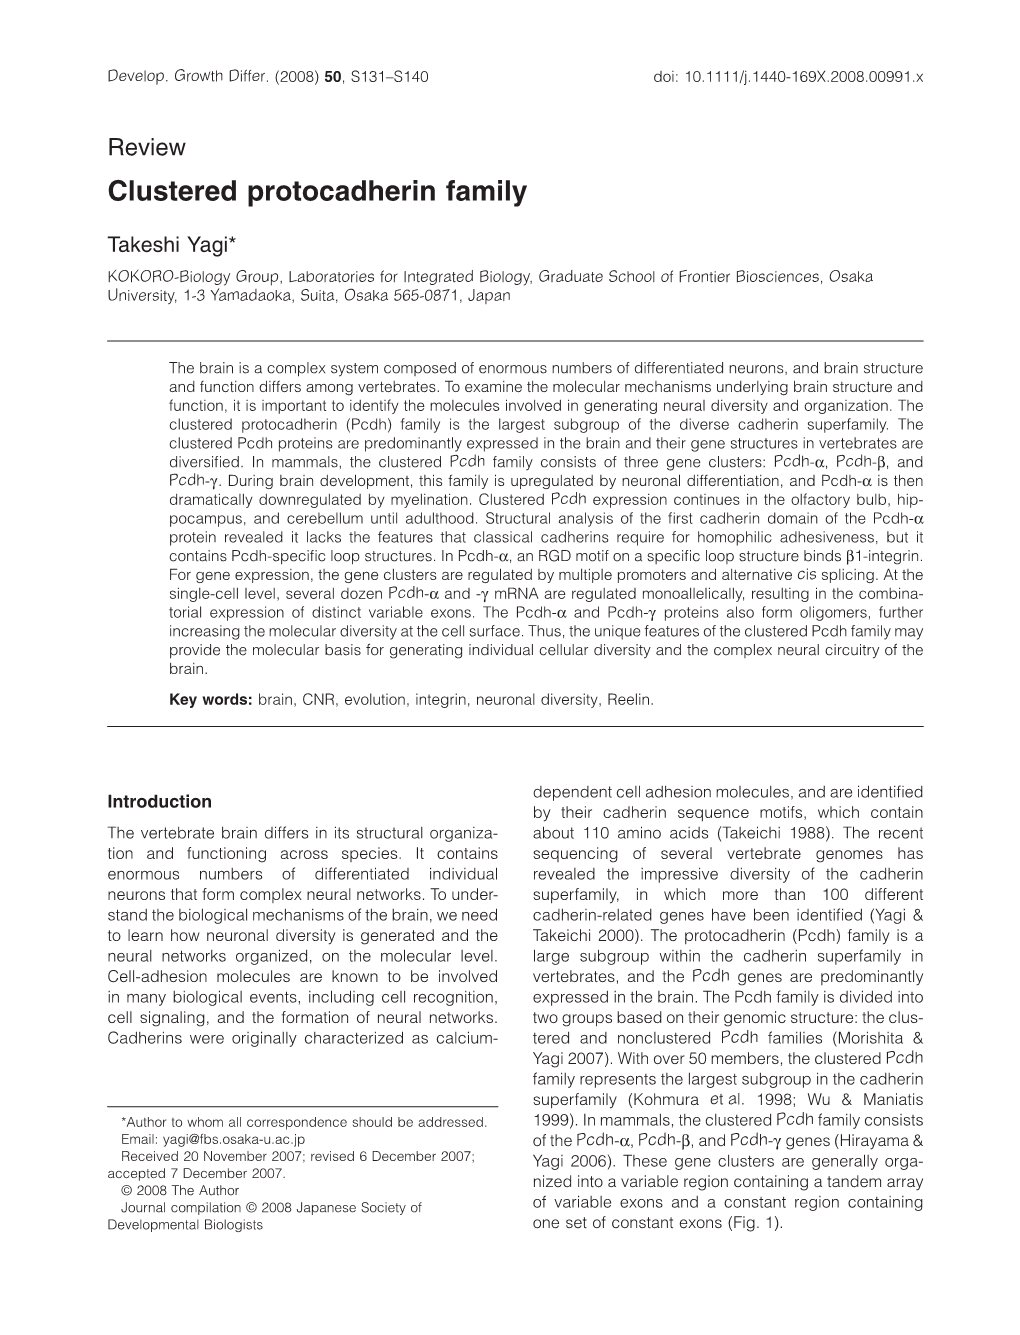 Clustered Protocadherin Family